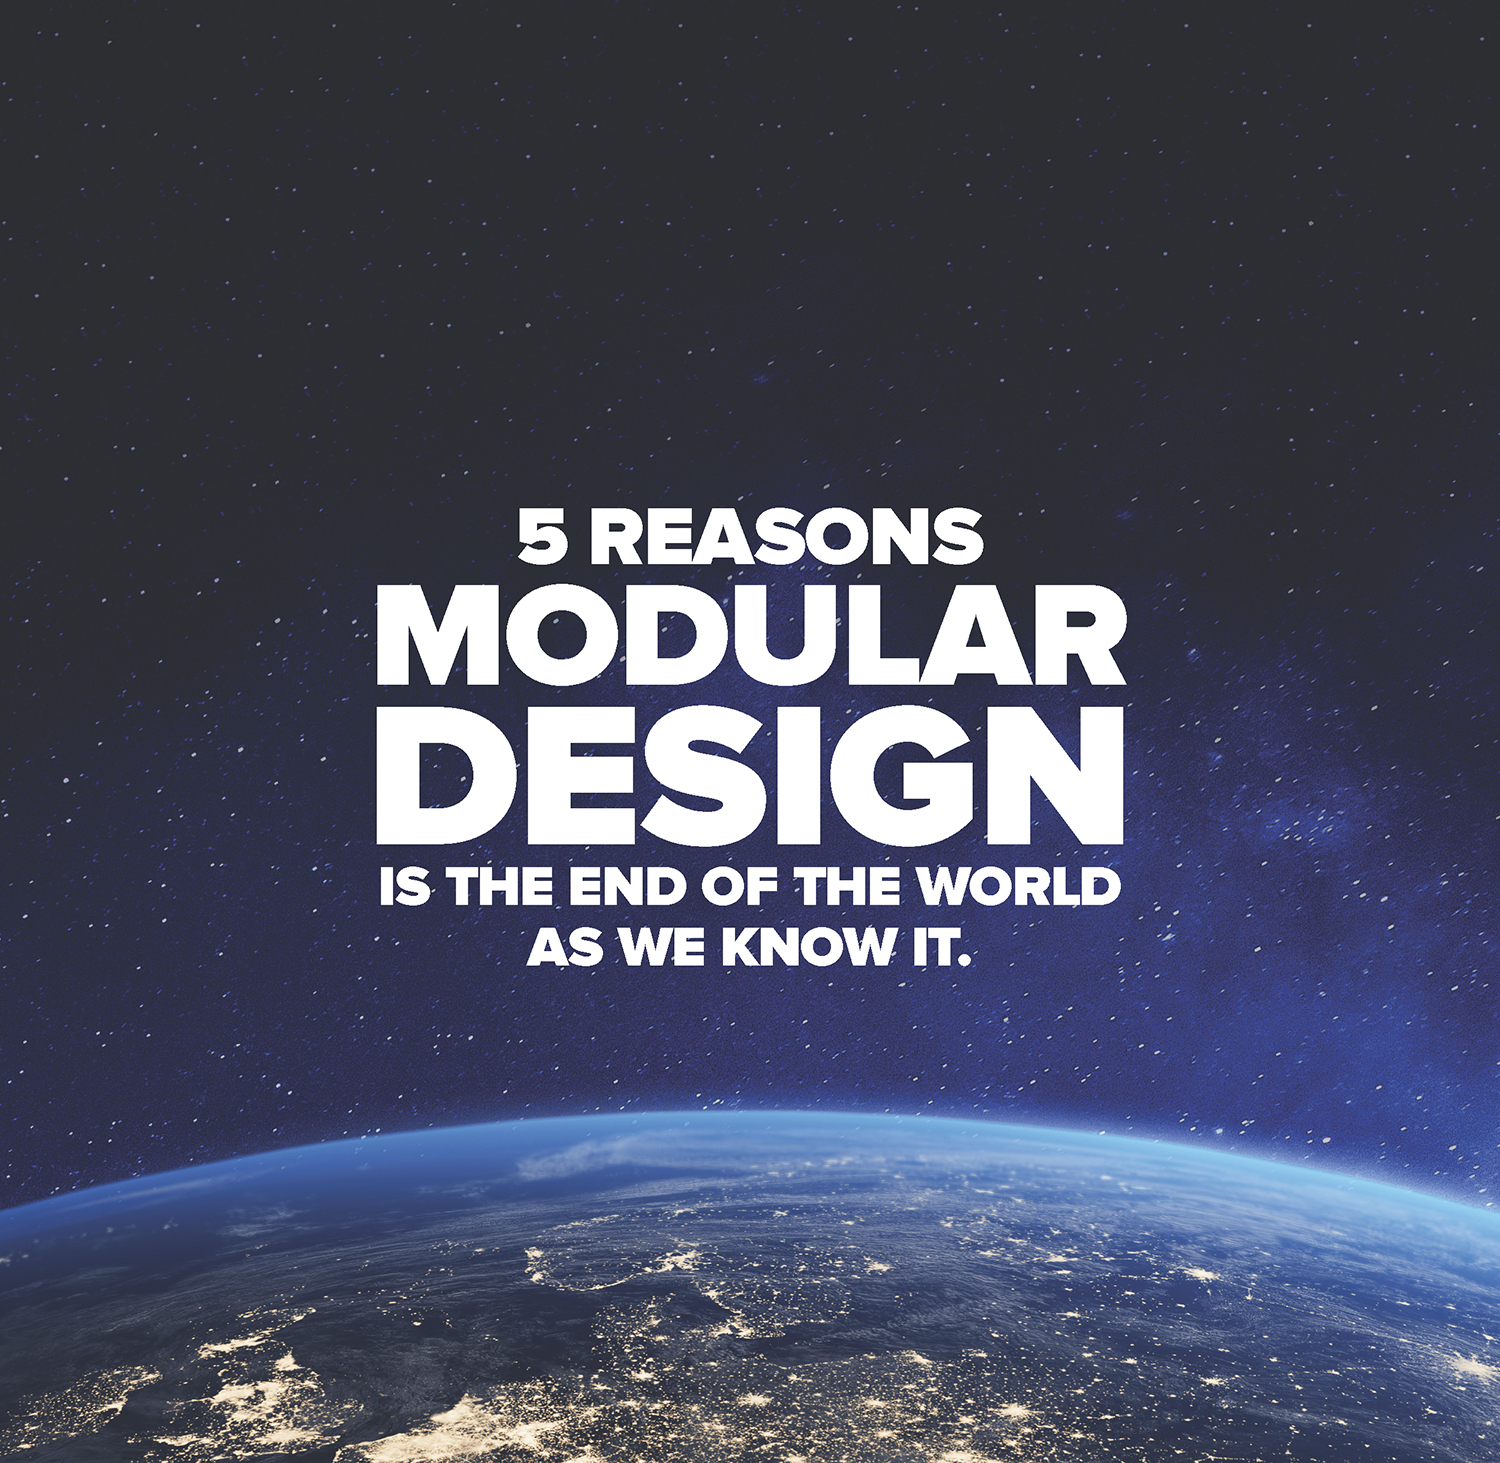 5 Reasons Modular Design is the End of the World as We Know It